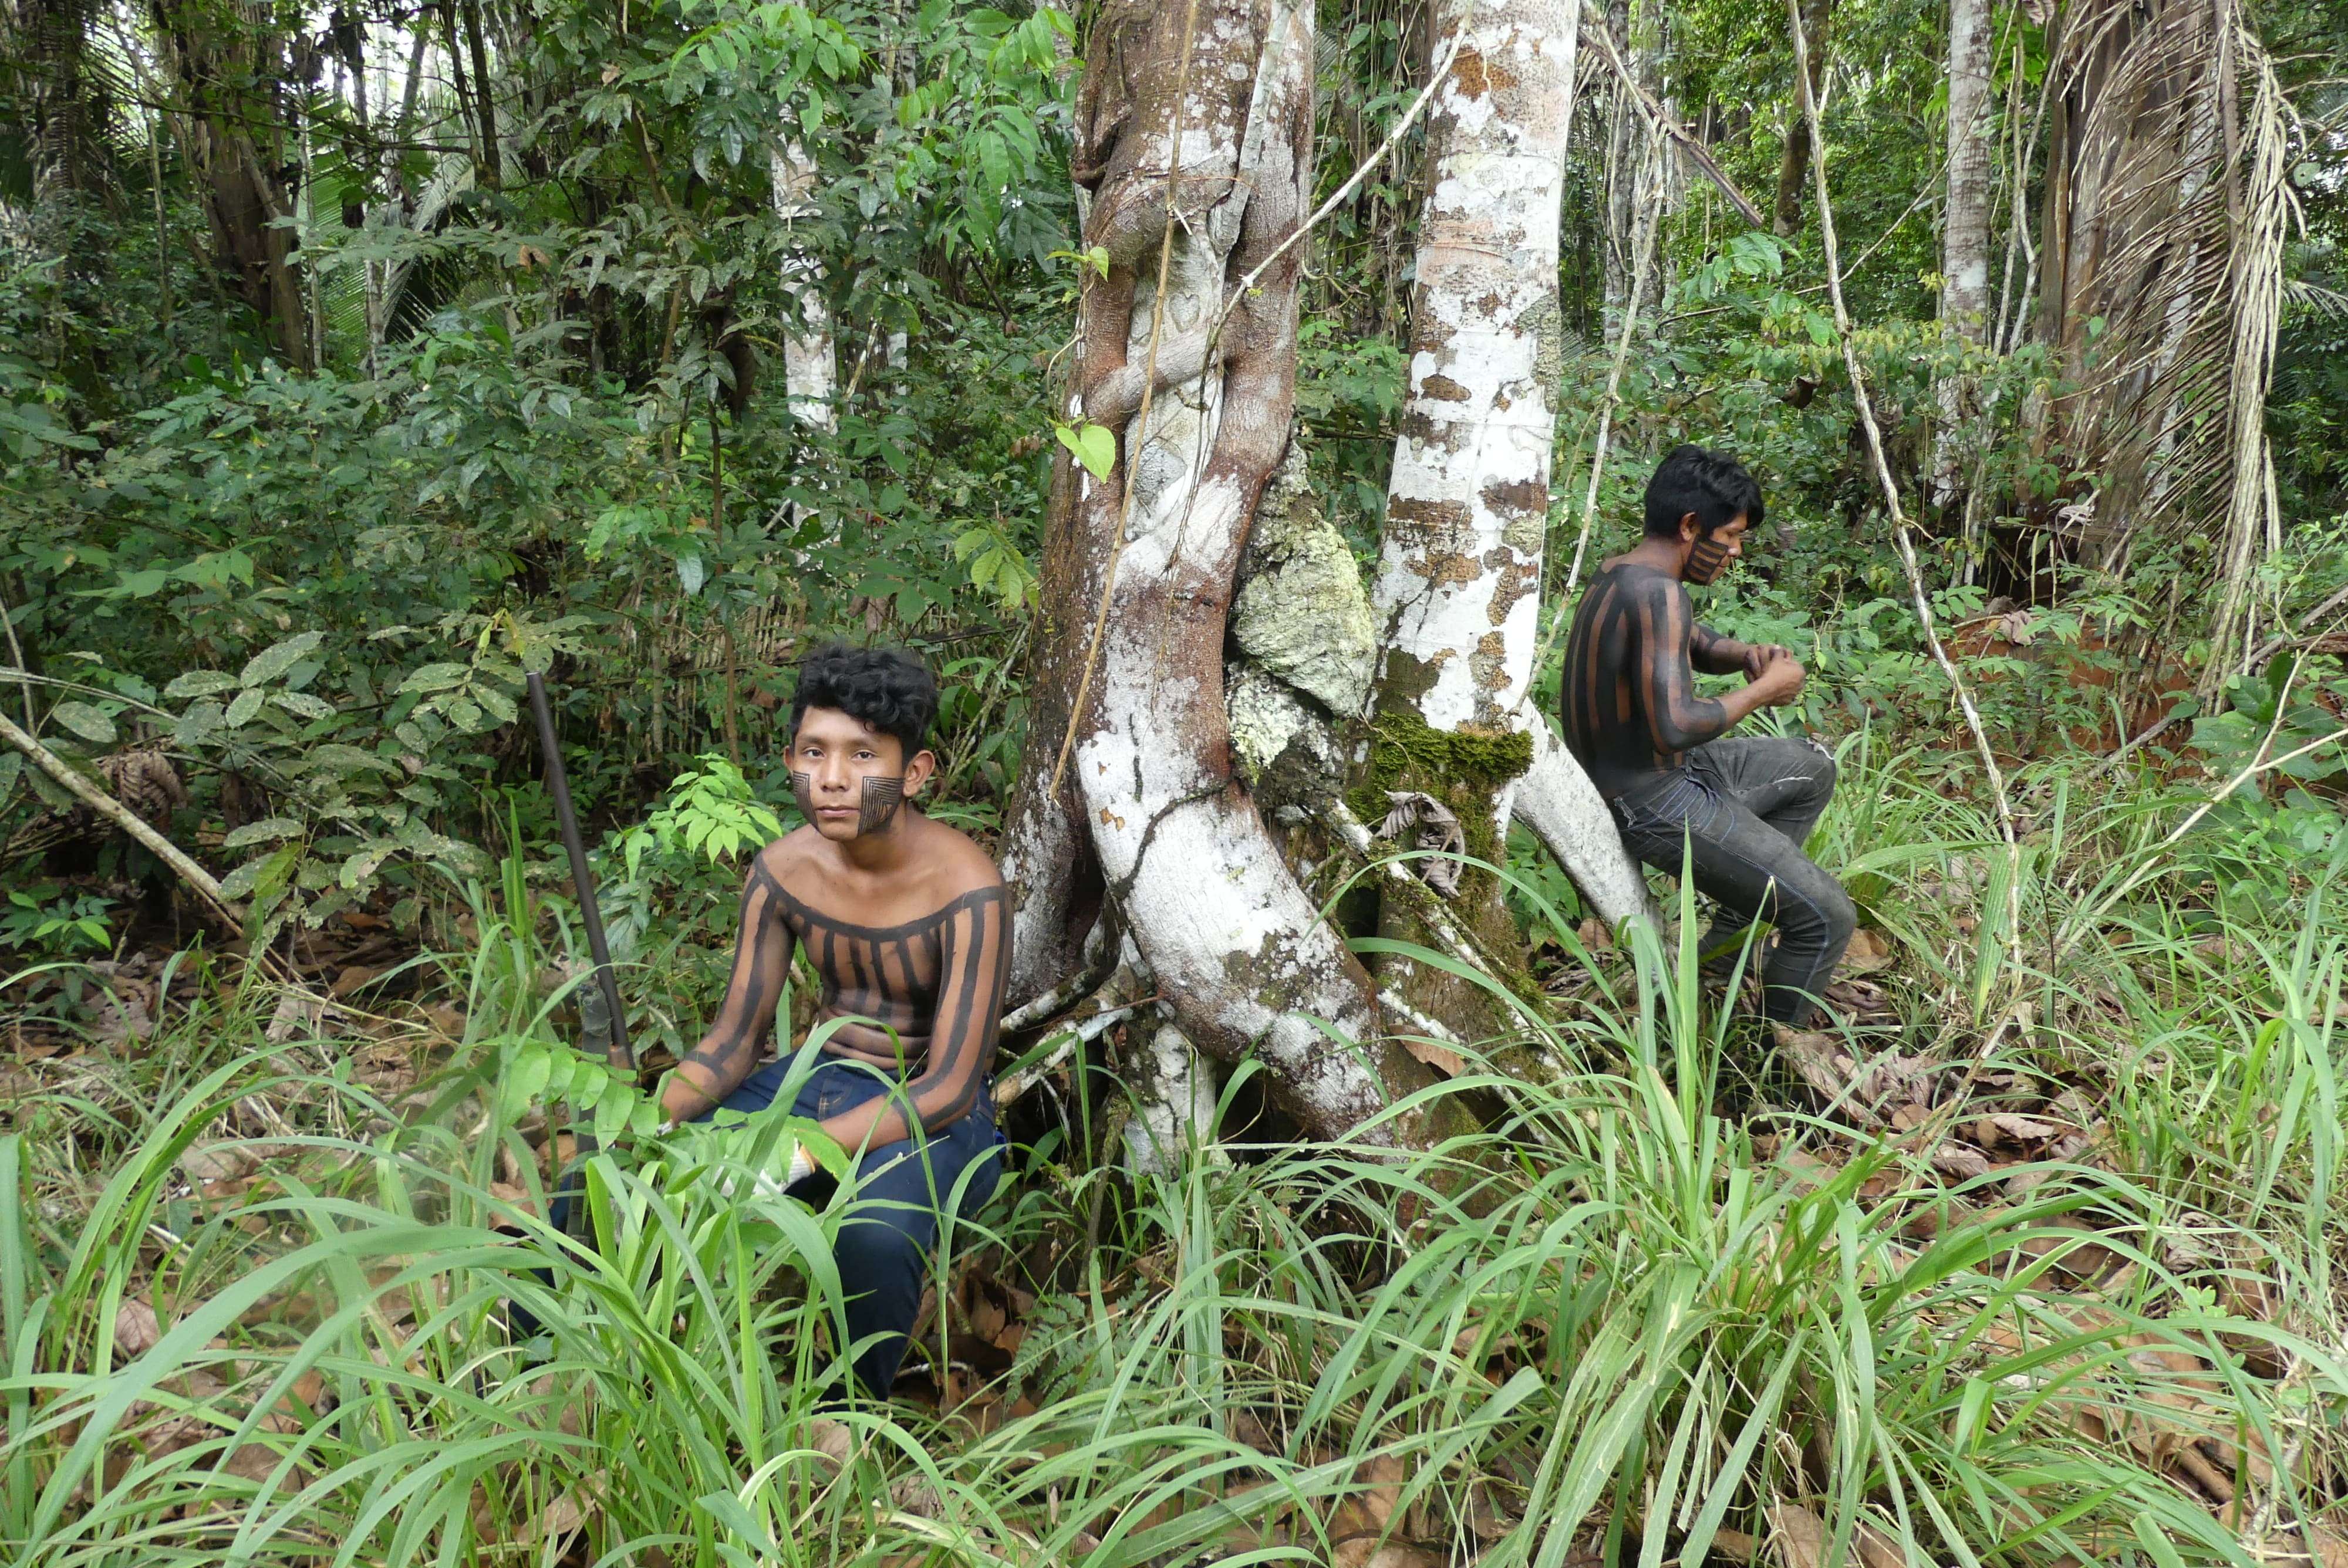 Amazonia and deforestation, the fight of the native populations